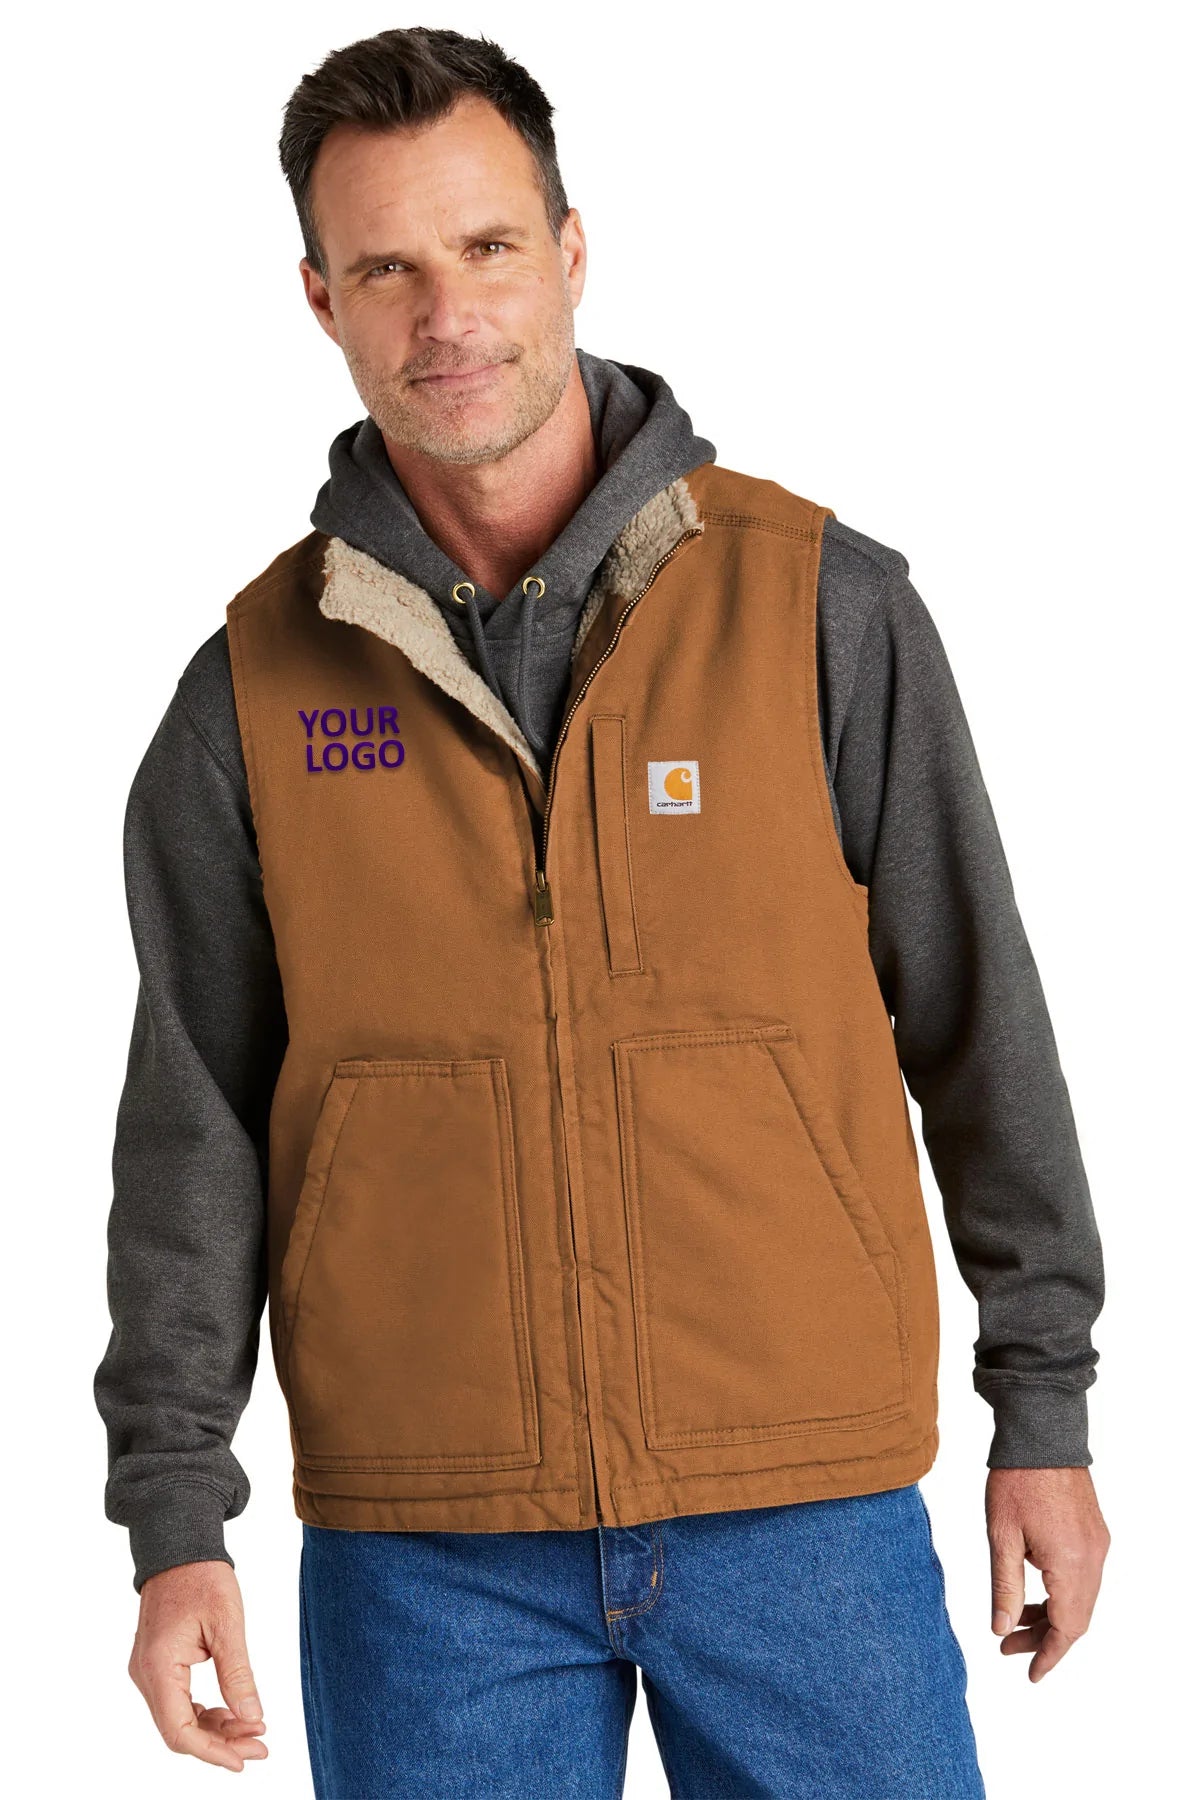 Carhartt CT104277 S Carhartt Brown CT104277 embroidered team jackets